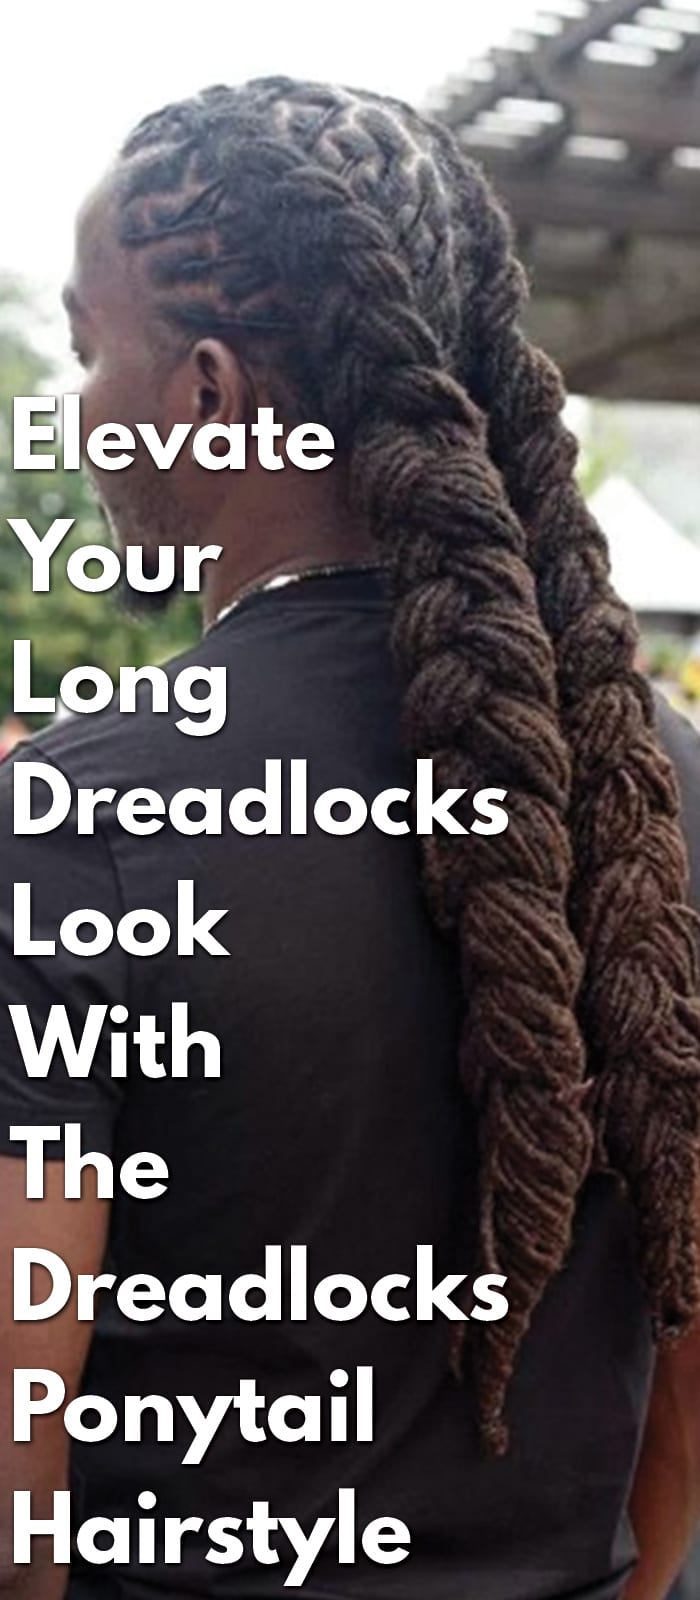 Elevate Your Dreadlocks Ponytail Hairstyle